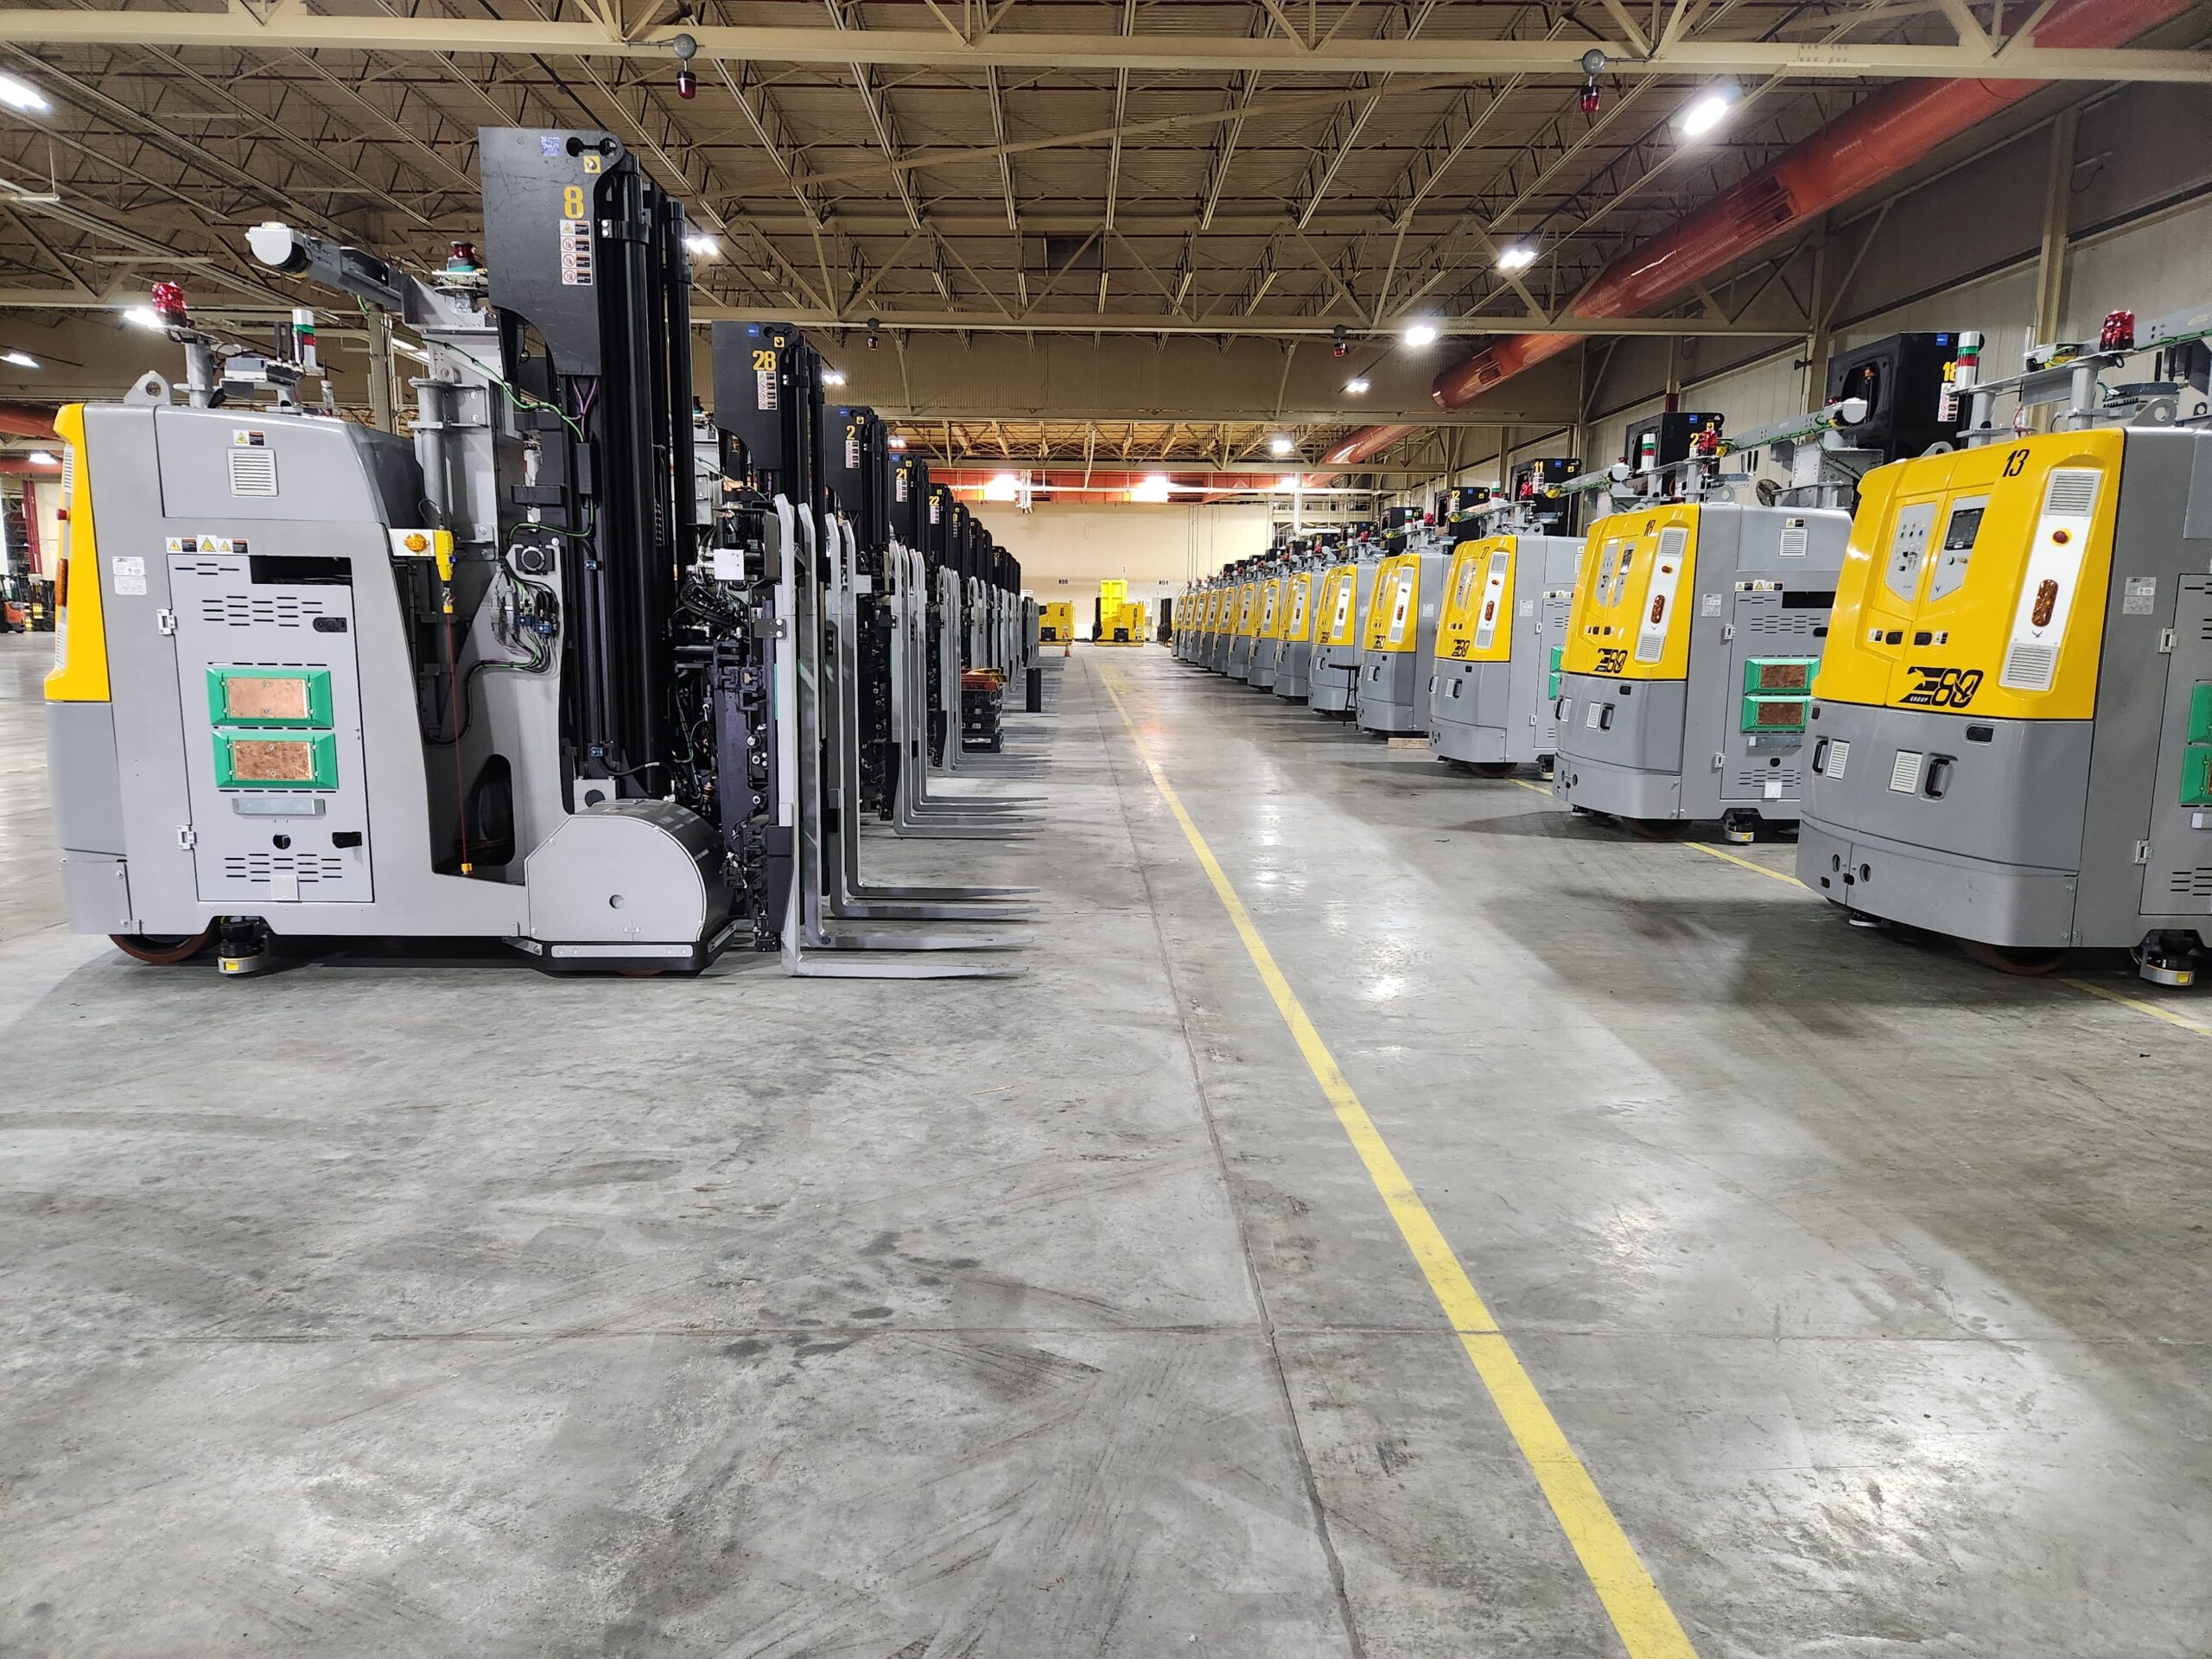 Rows of laser guided vehicles in a warehouse